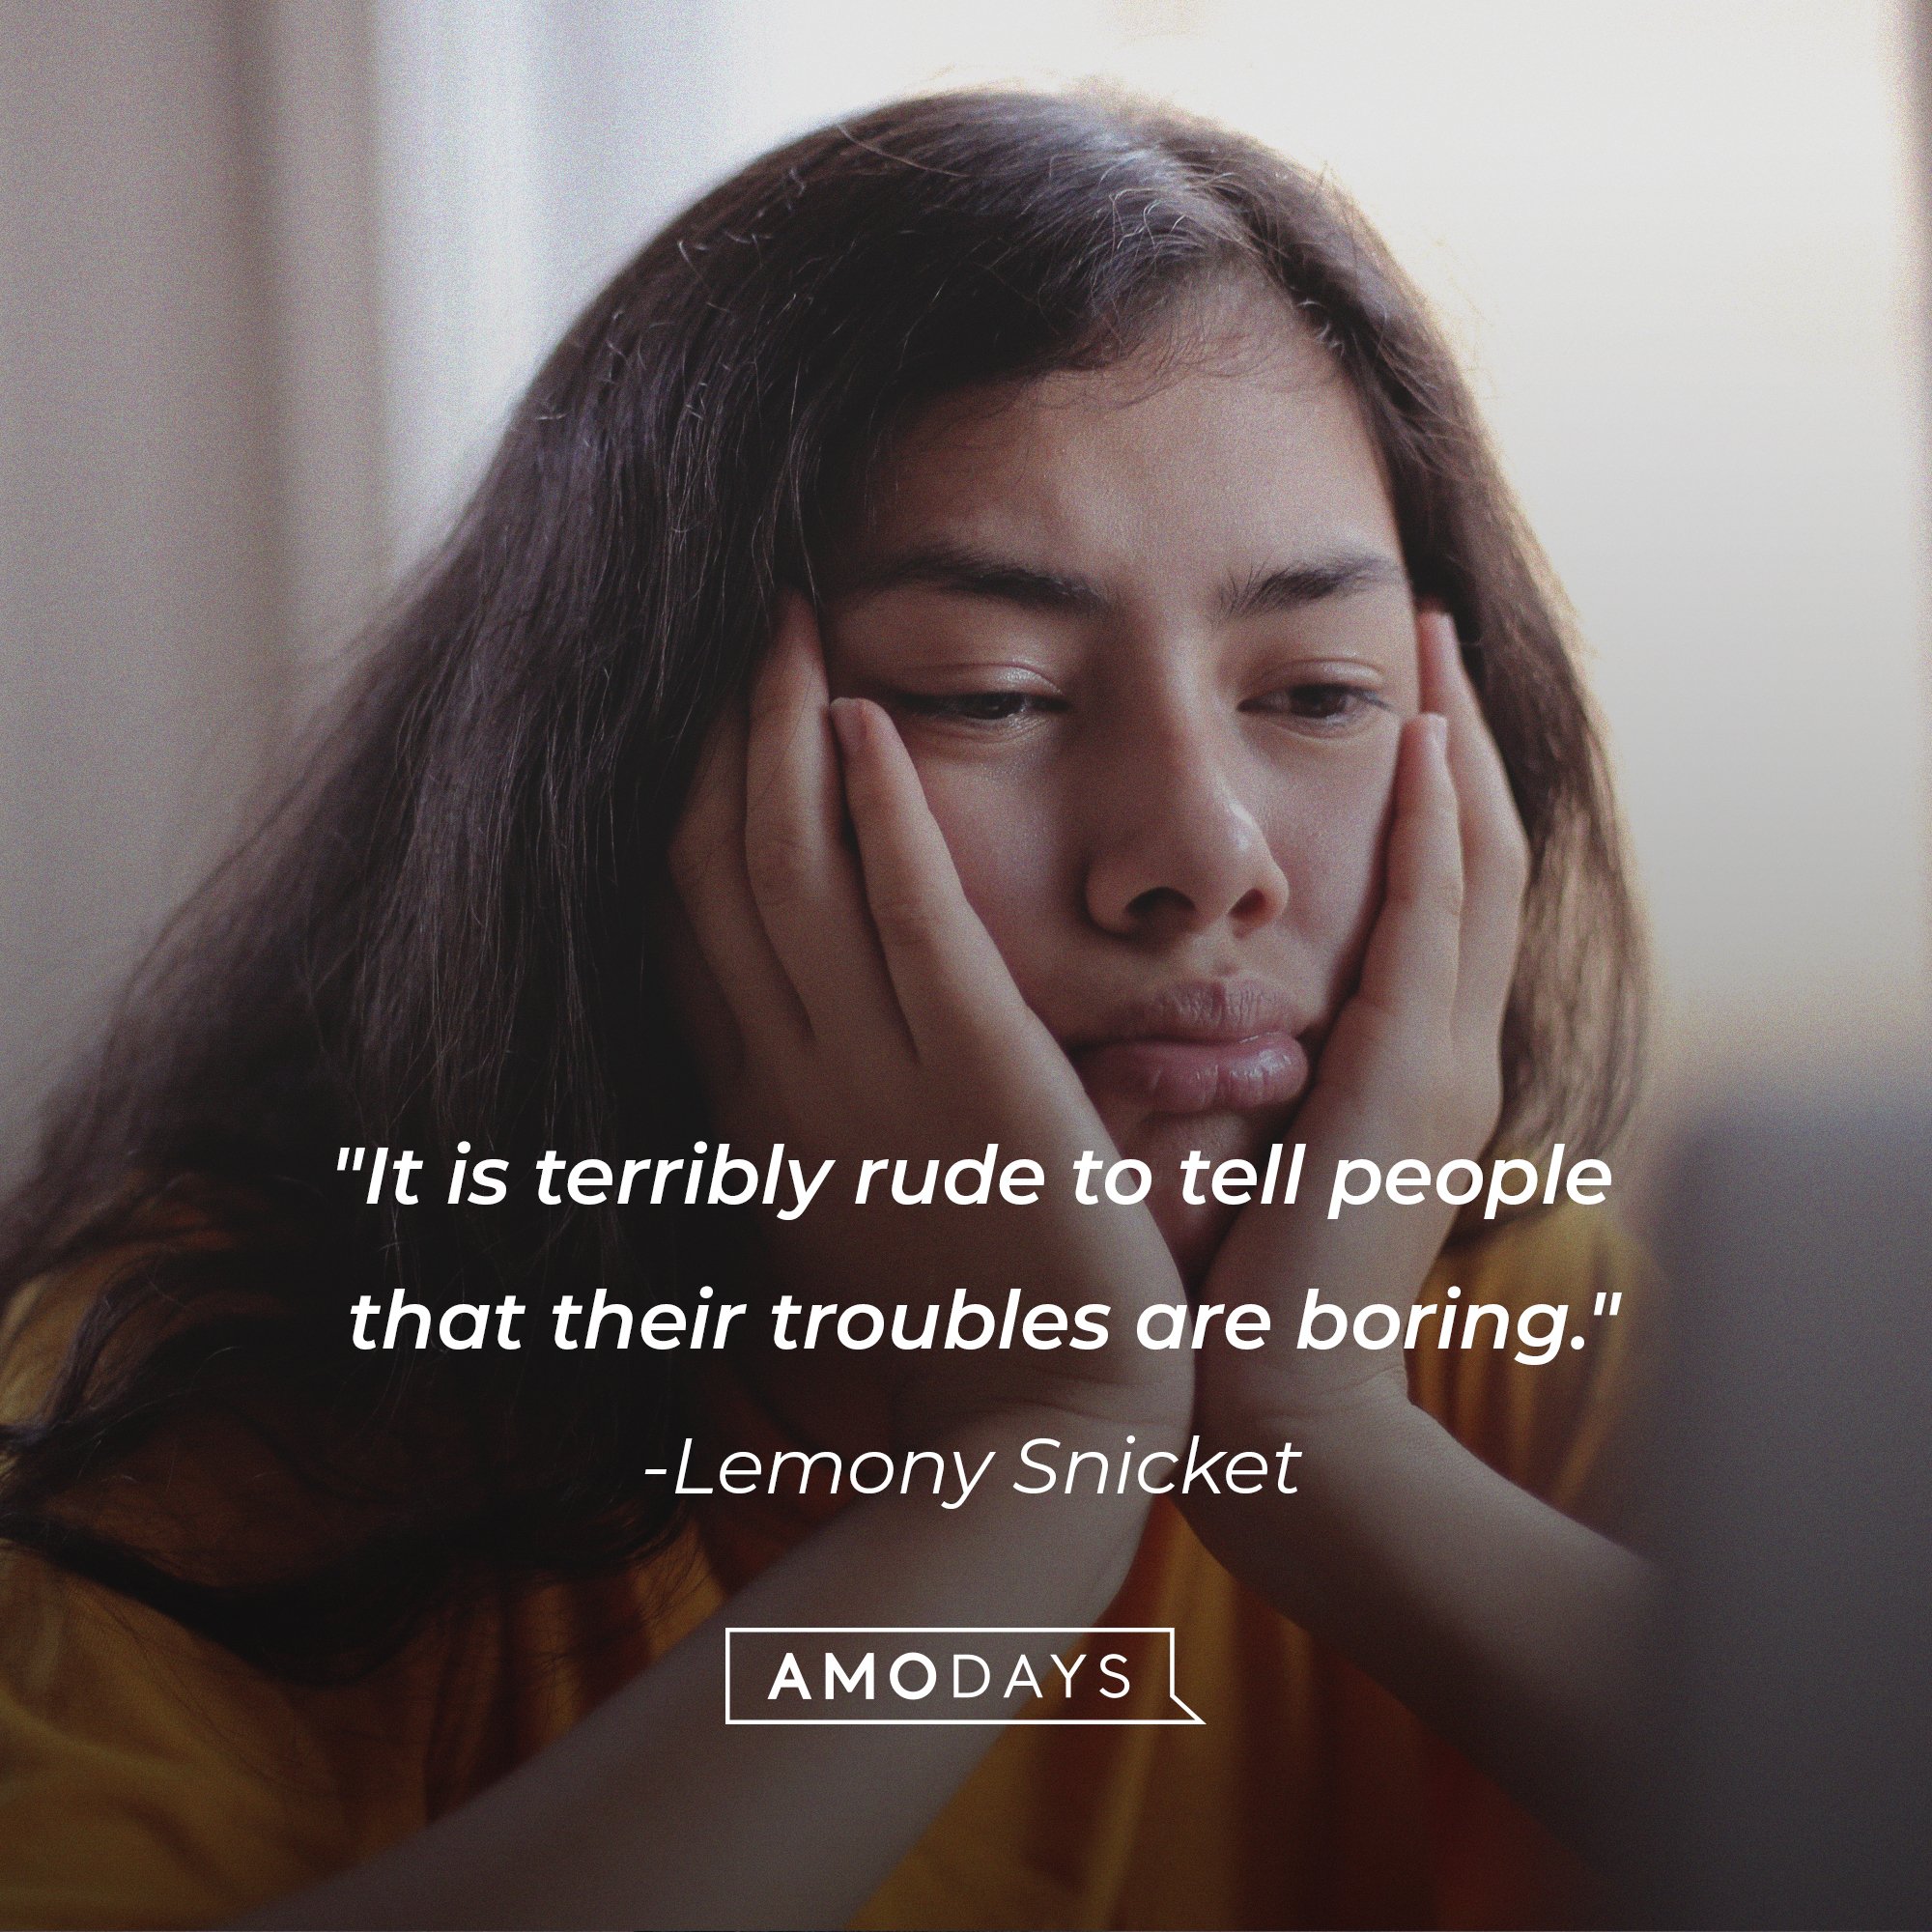  Lemony Snicket’s quote: "It is terribly rude to tell people that their troubles are boring." | Image: AmoDays